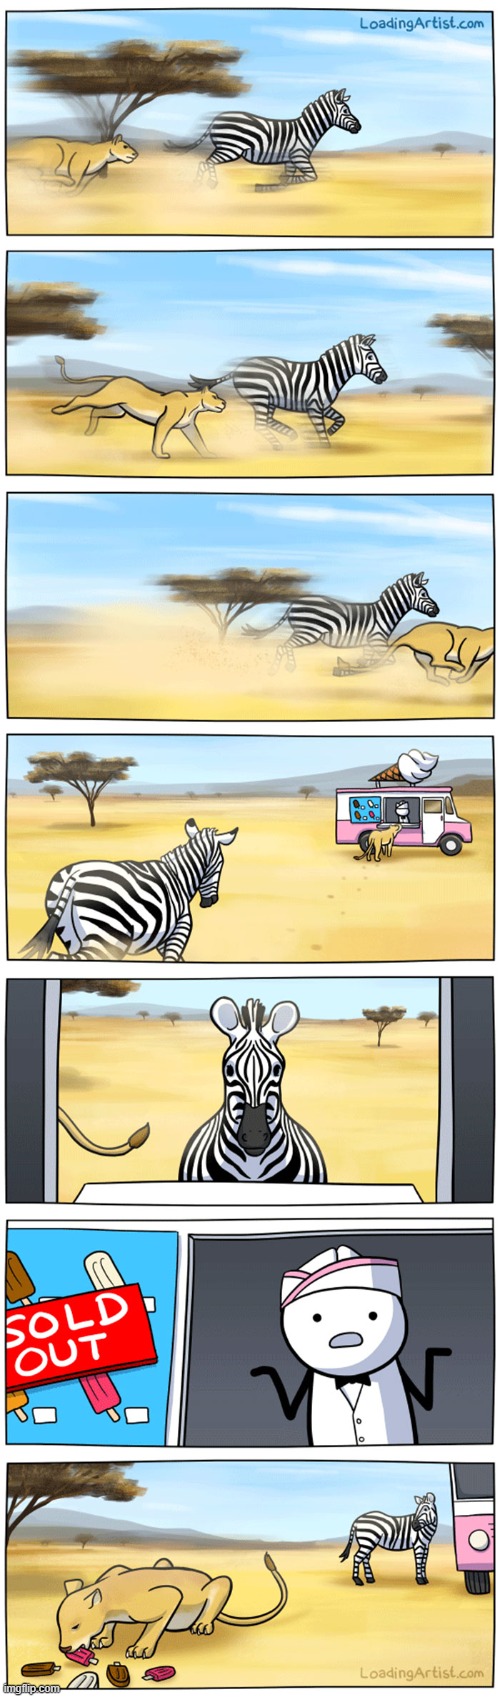 image tagged in lion,zebra,ice cream truck | made w/ Imgflip meme maker